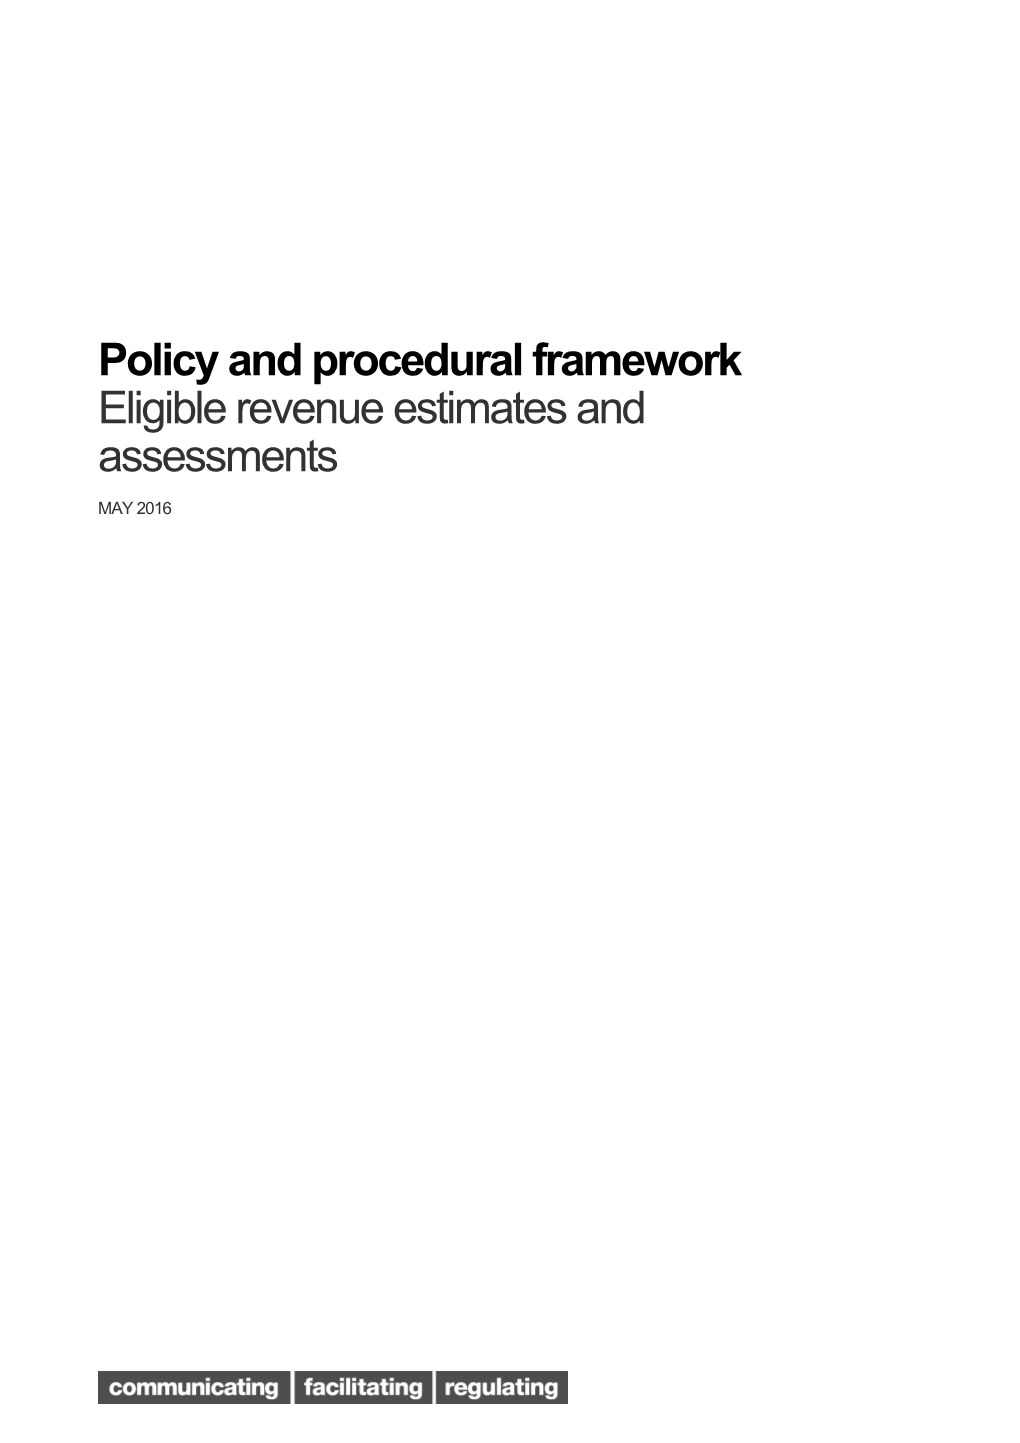 Policy and Procedural Framework